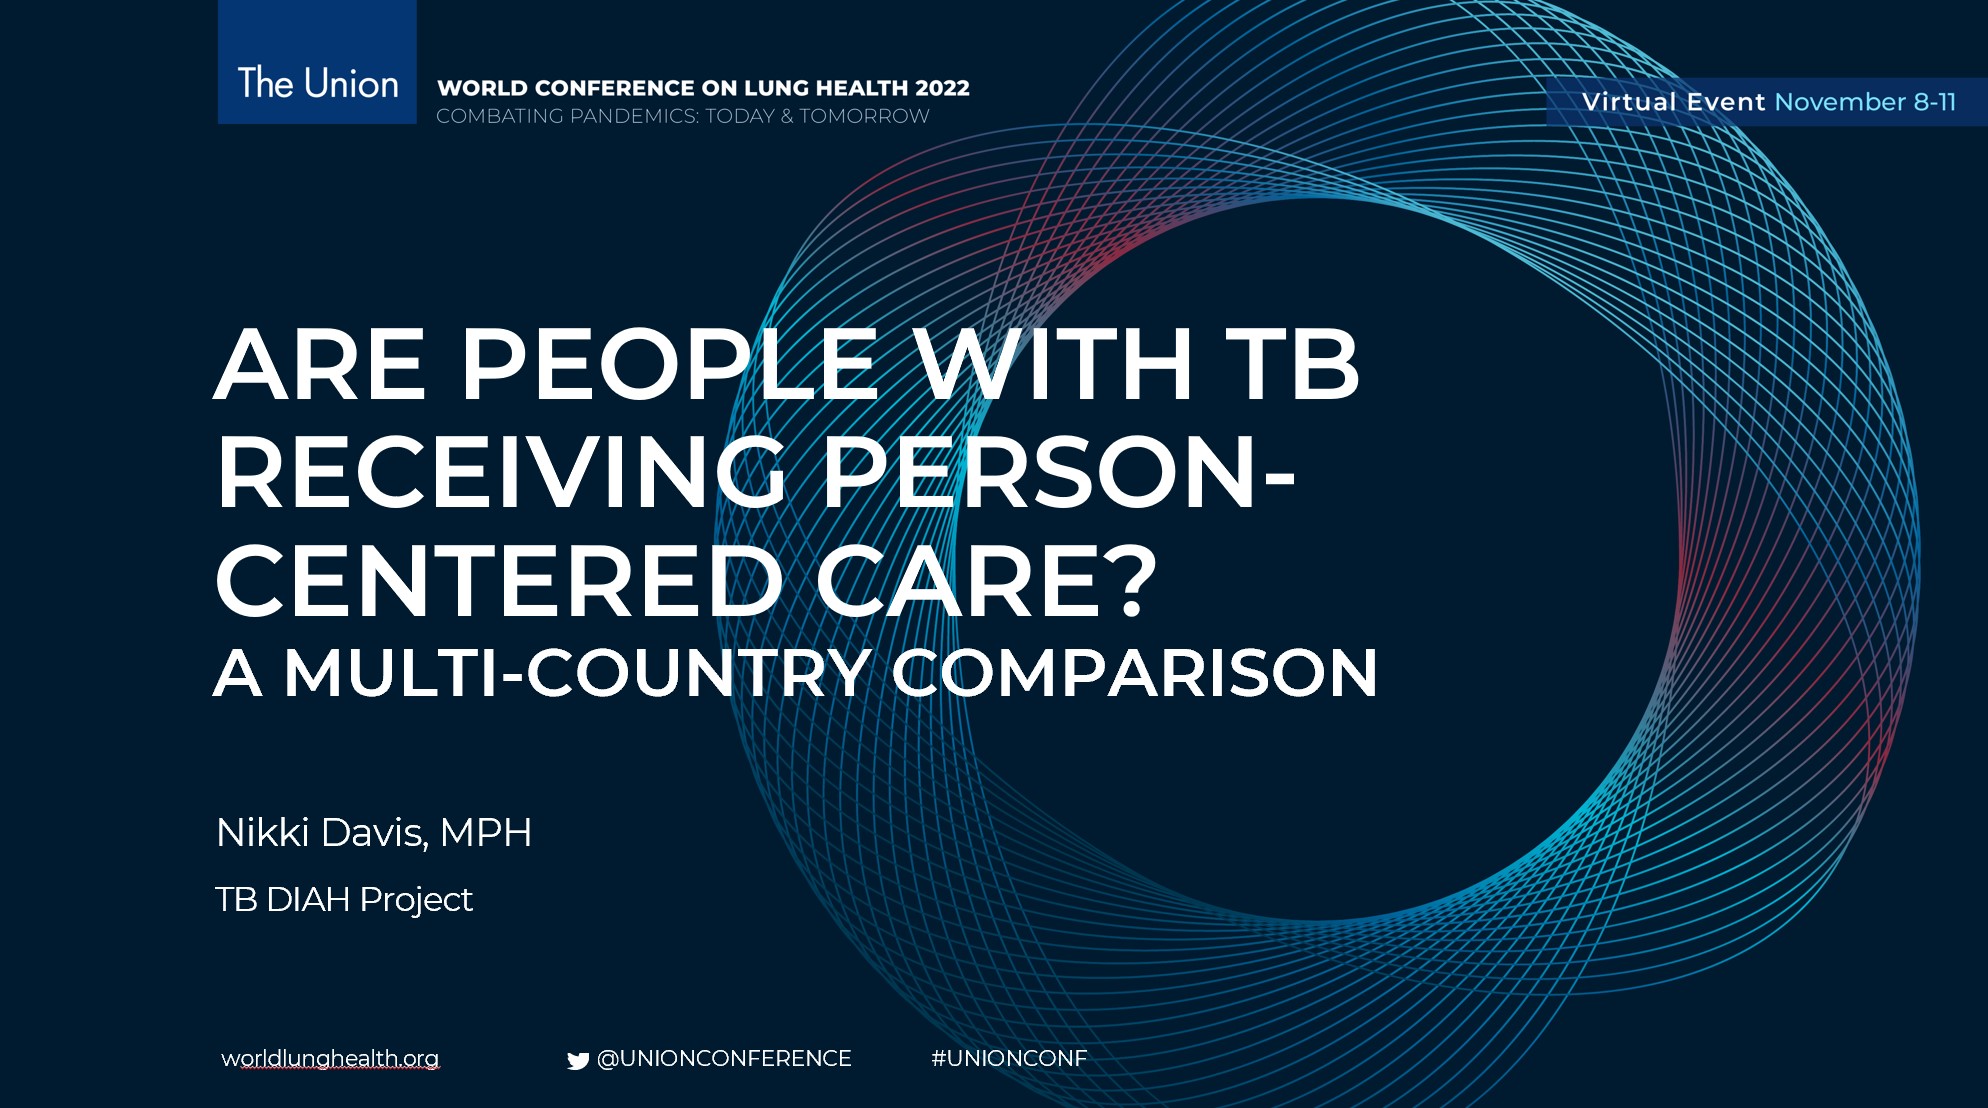 Are People with TB Receiving Person-Centered Care? A Multi-country Comparison